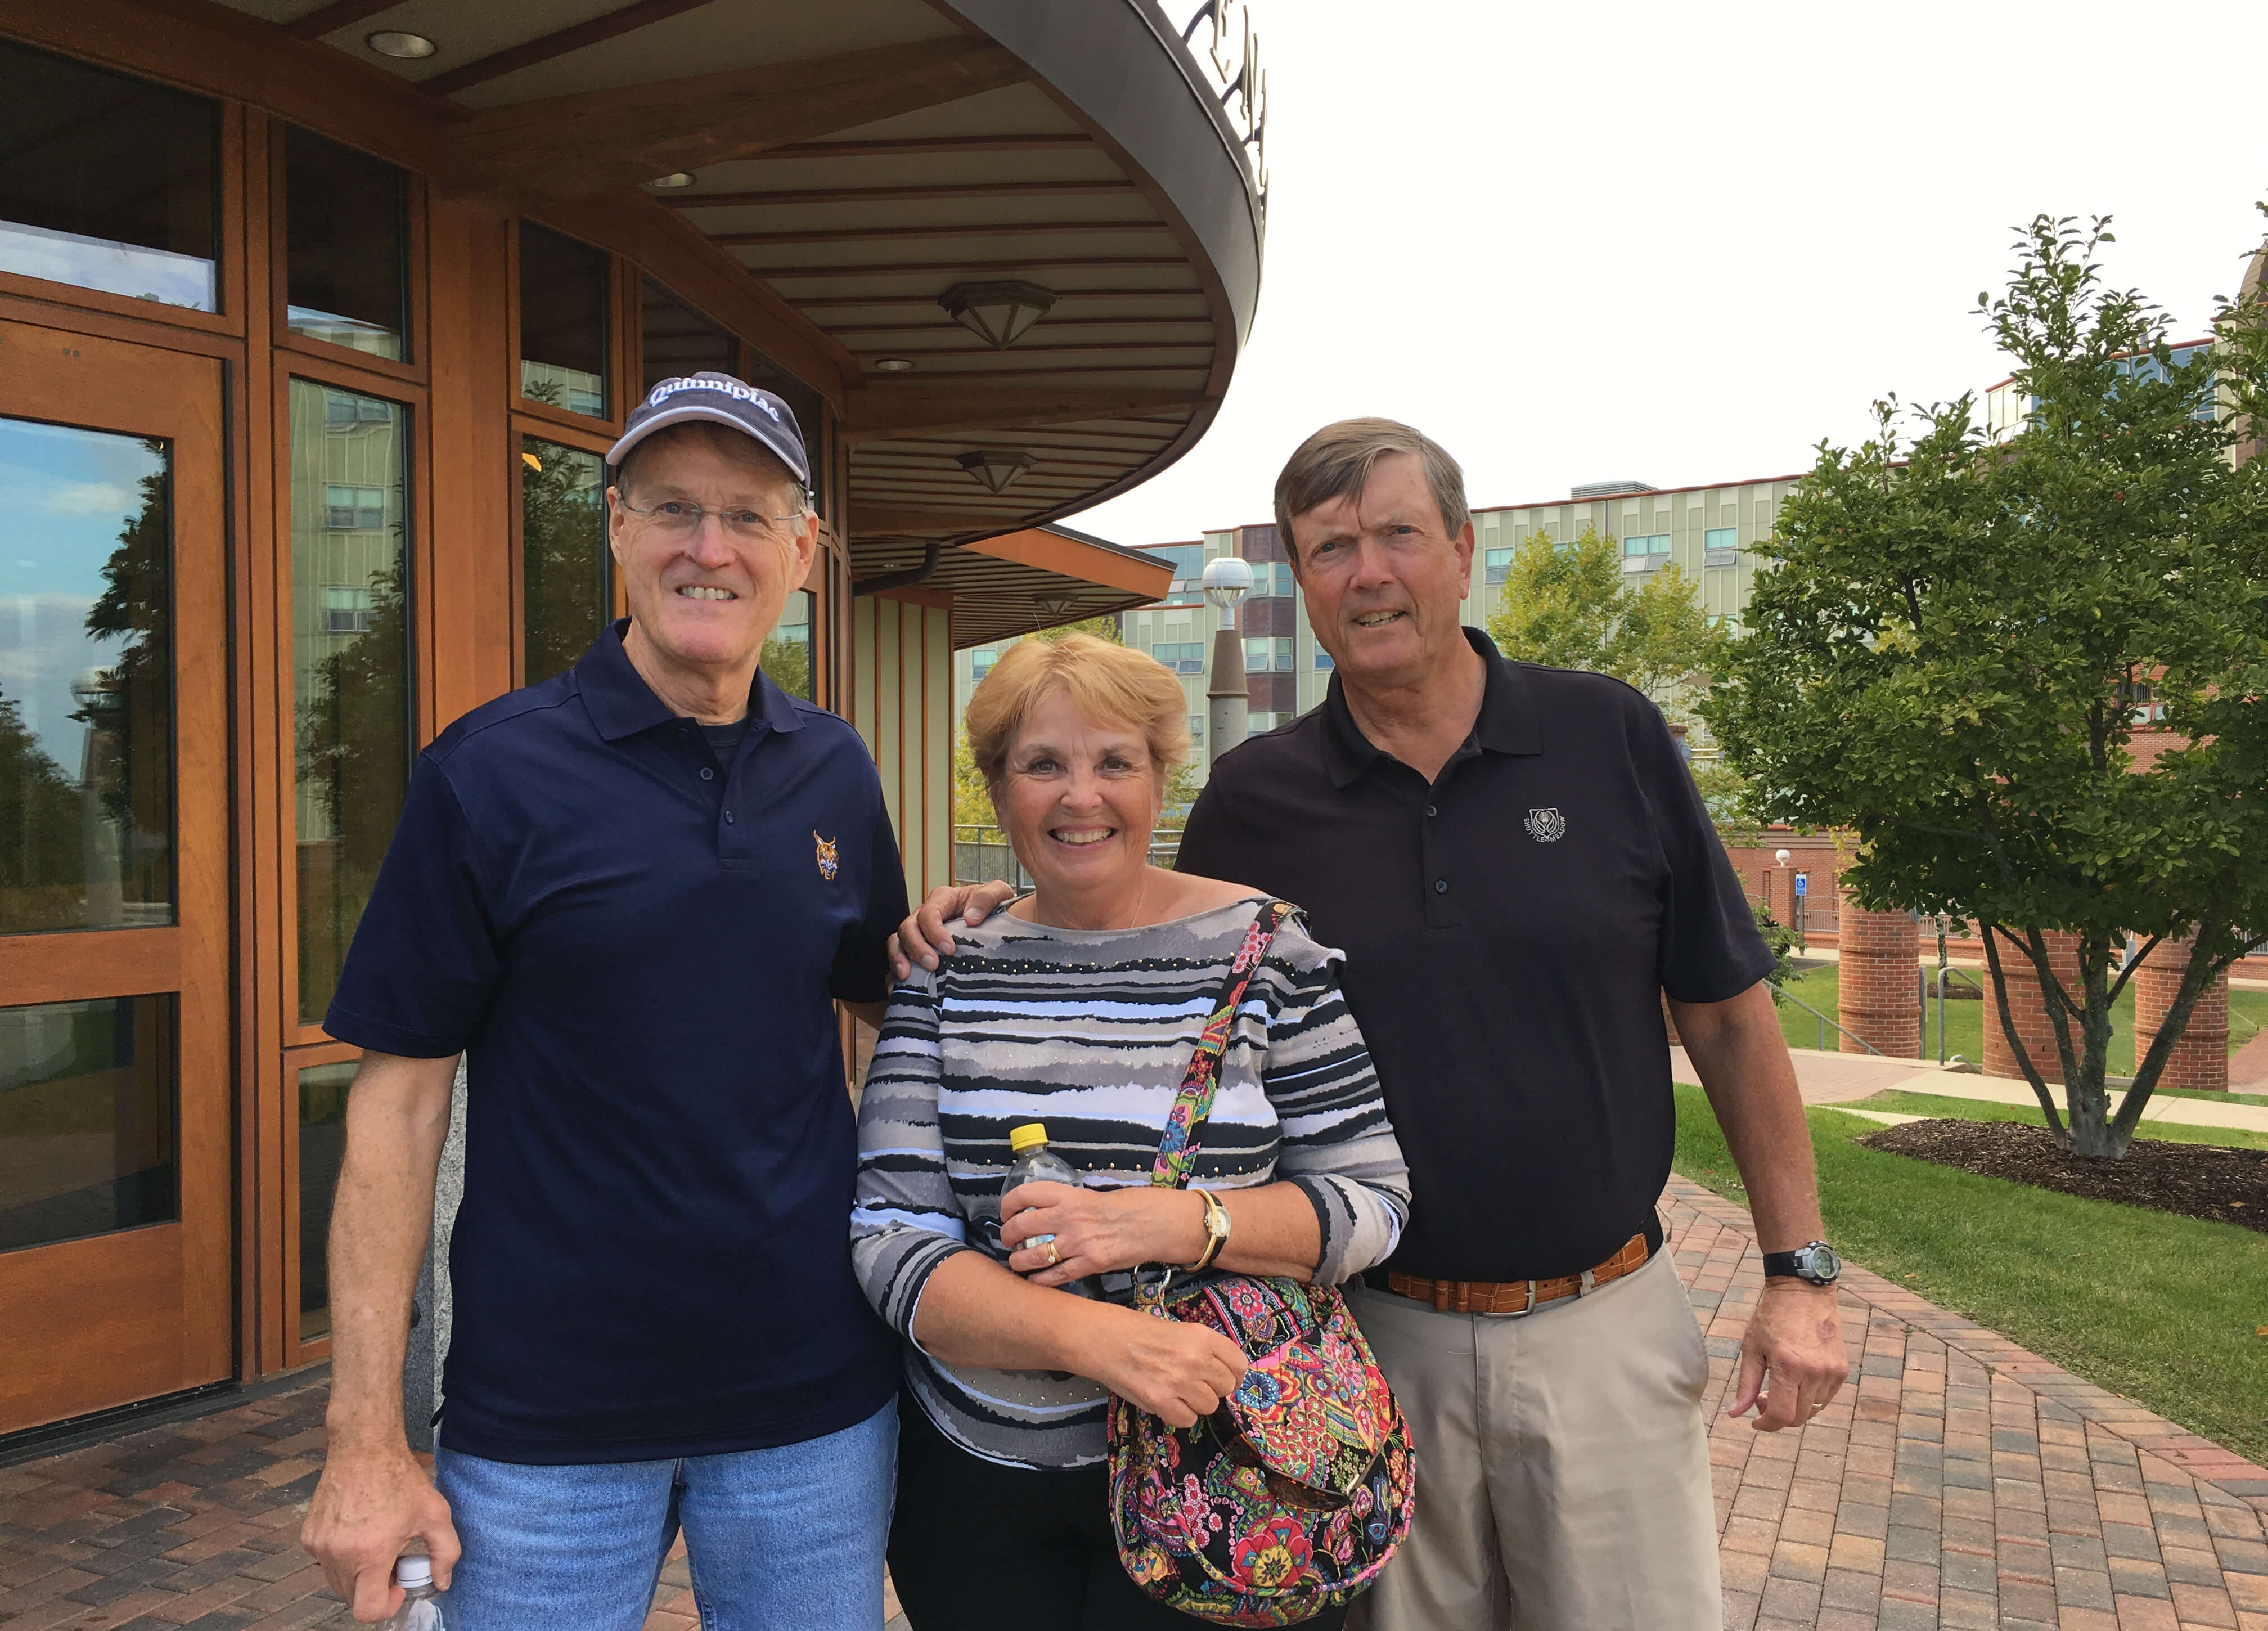 Paul and Nancy Smith with Alan Lasch at York Hill Campus